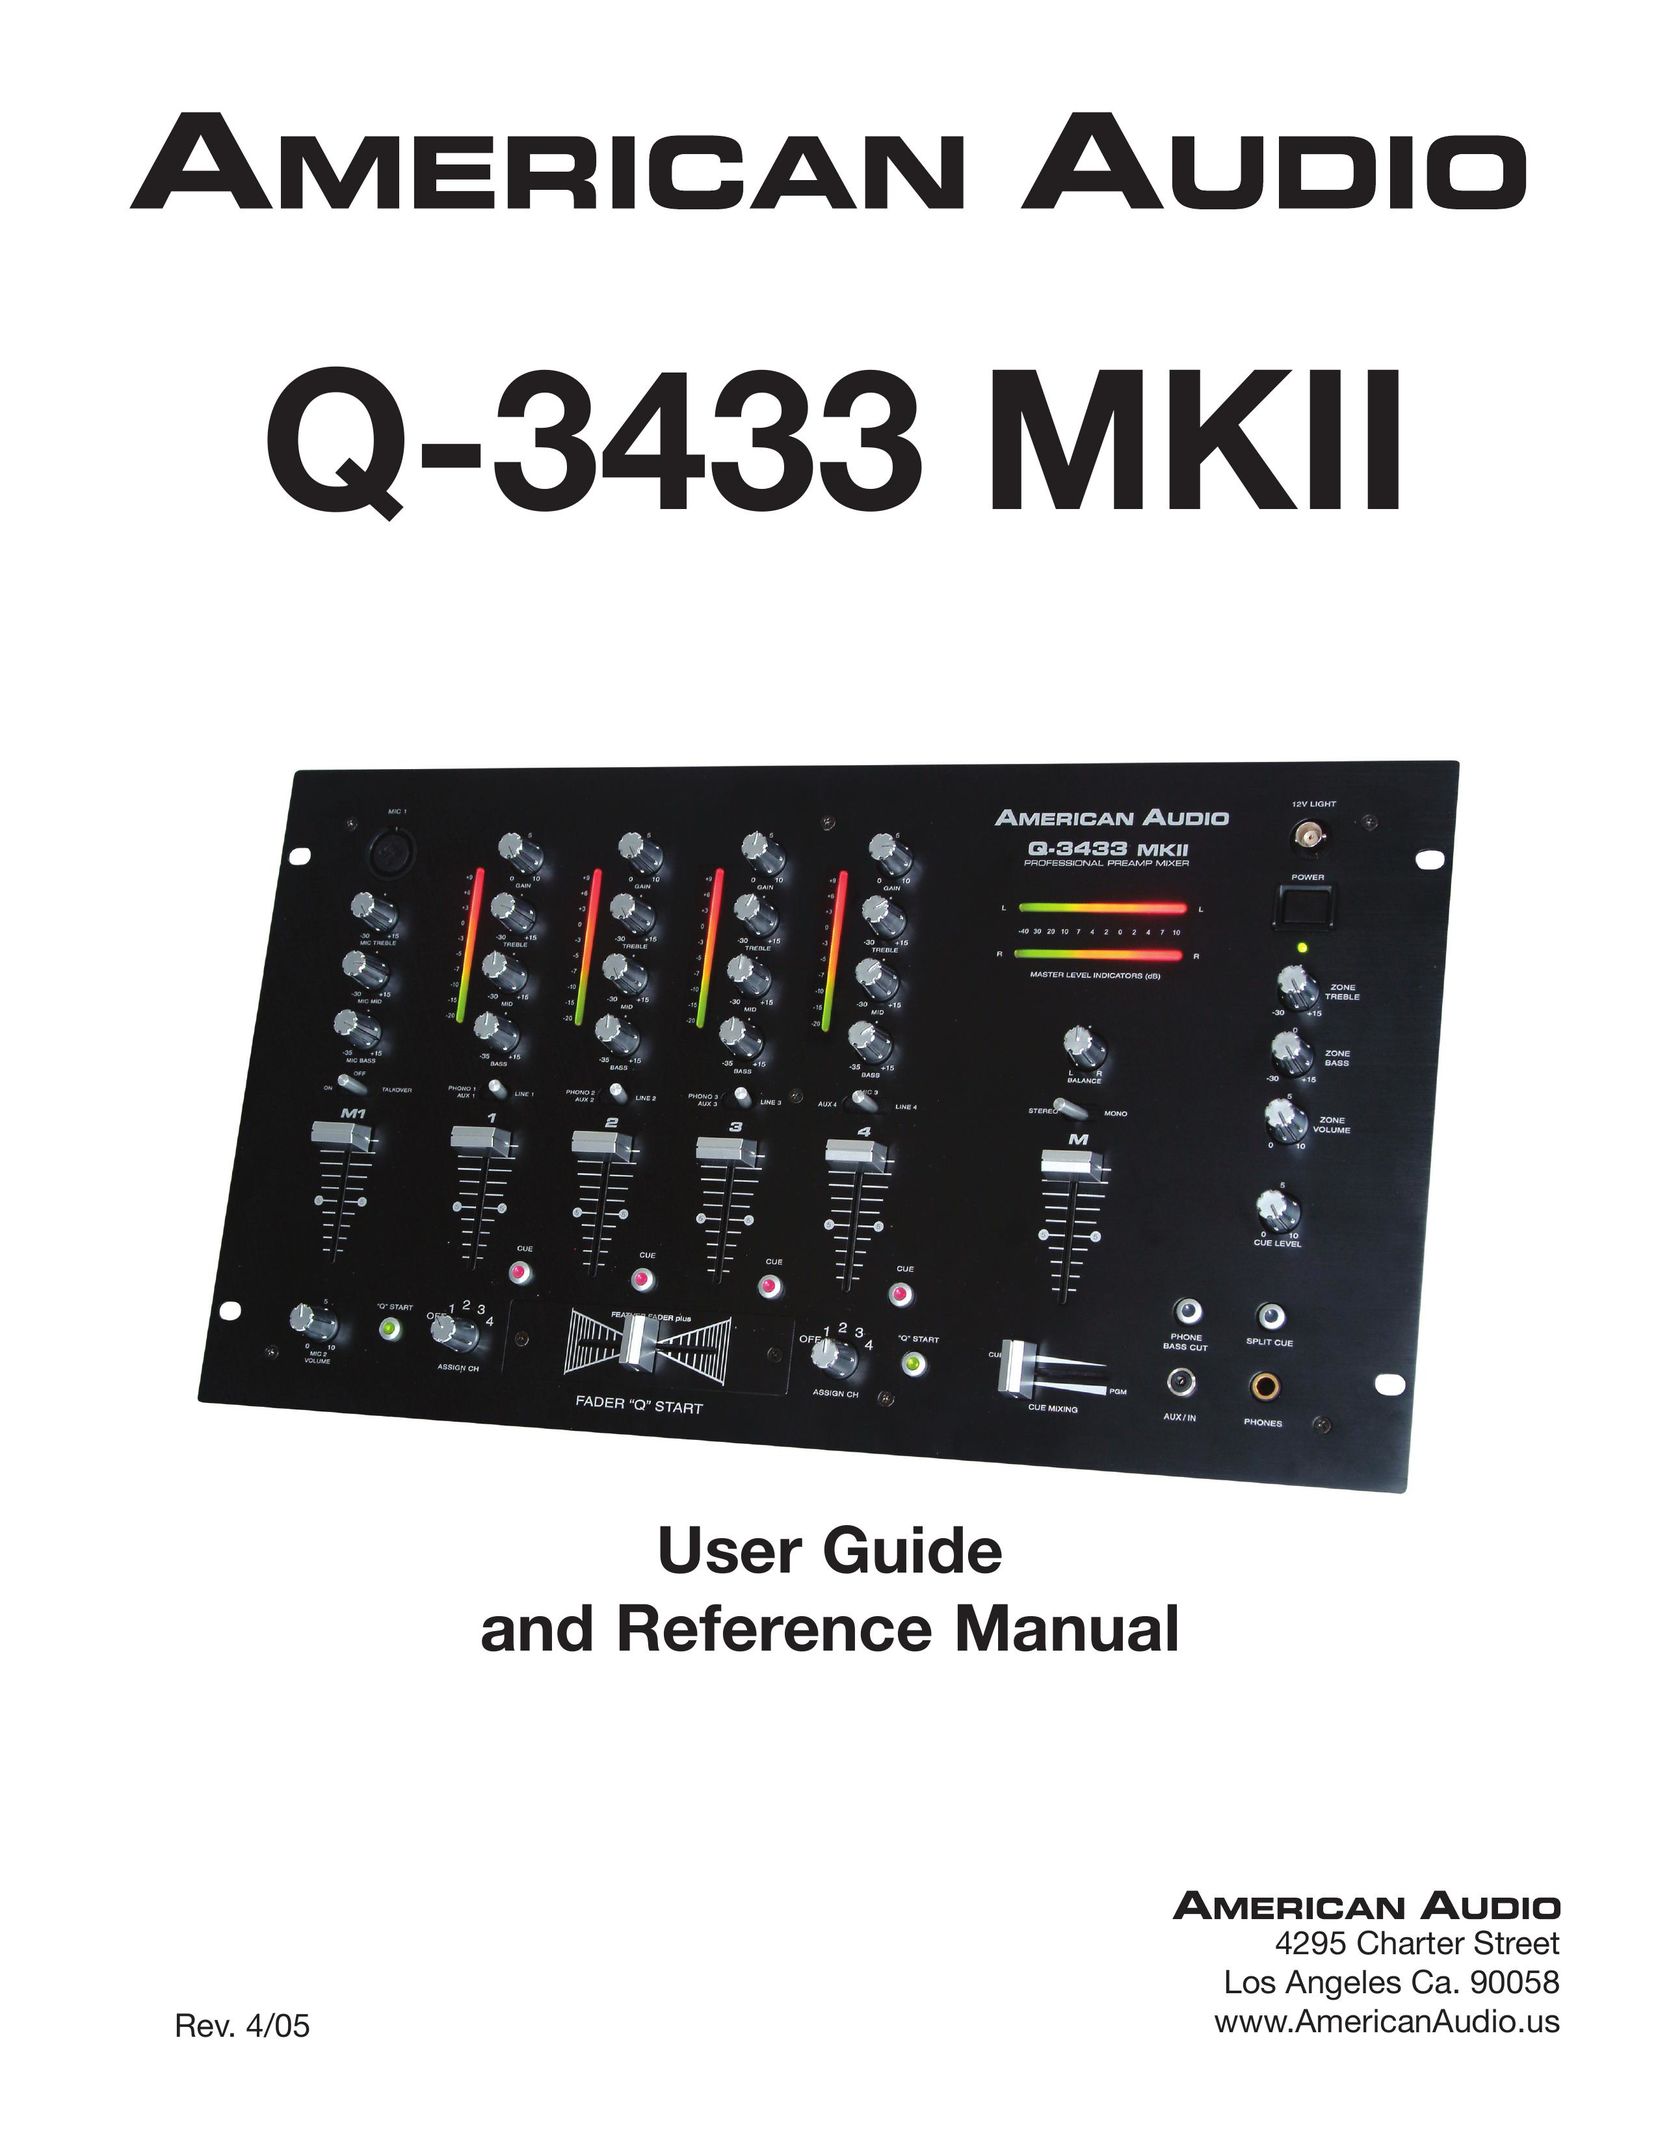 American Audio Q-3433 Car Stereo System User Manual (Page 1)